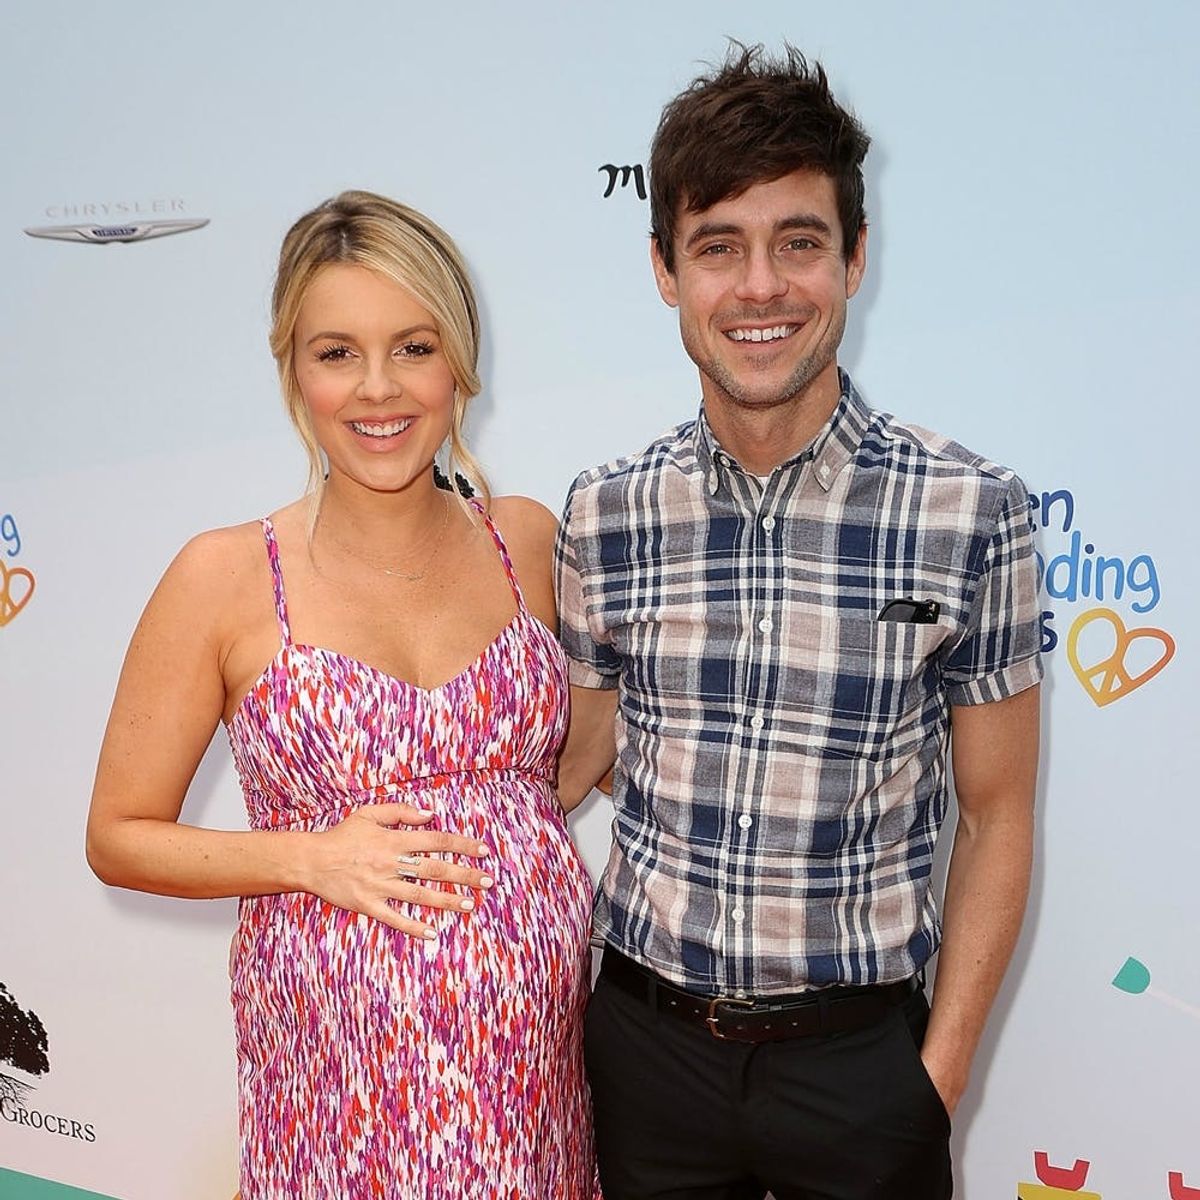 This Is the Super Sweet Thing Ali Fedotowsky’s Fiance Has Done for Her Every Day of Her Pregnancy